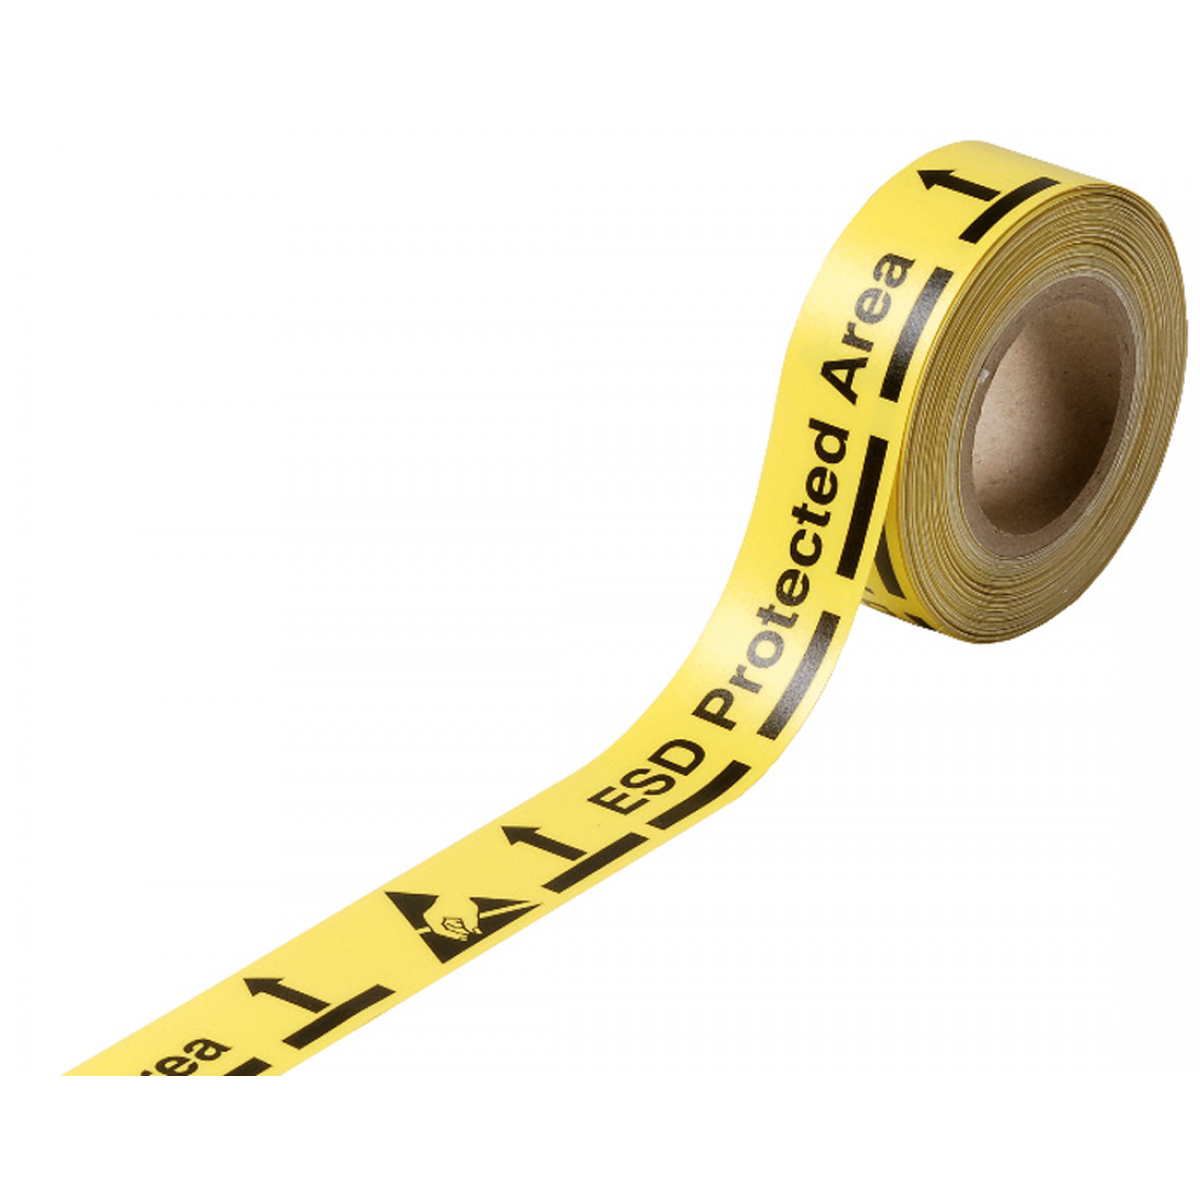 Description:EPA delineation tape, Roll length :25 m, Width / Thickness:50 mm / 300µ